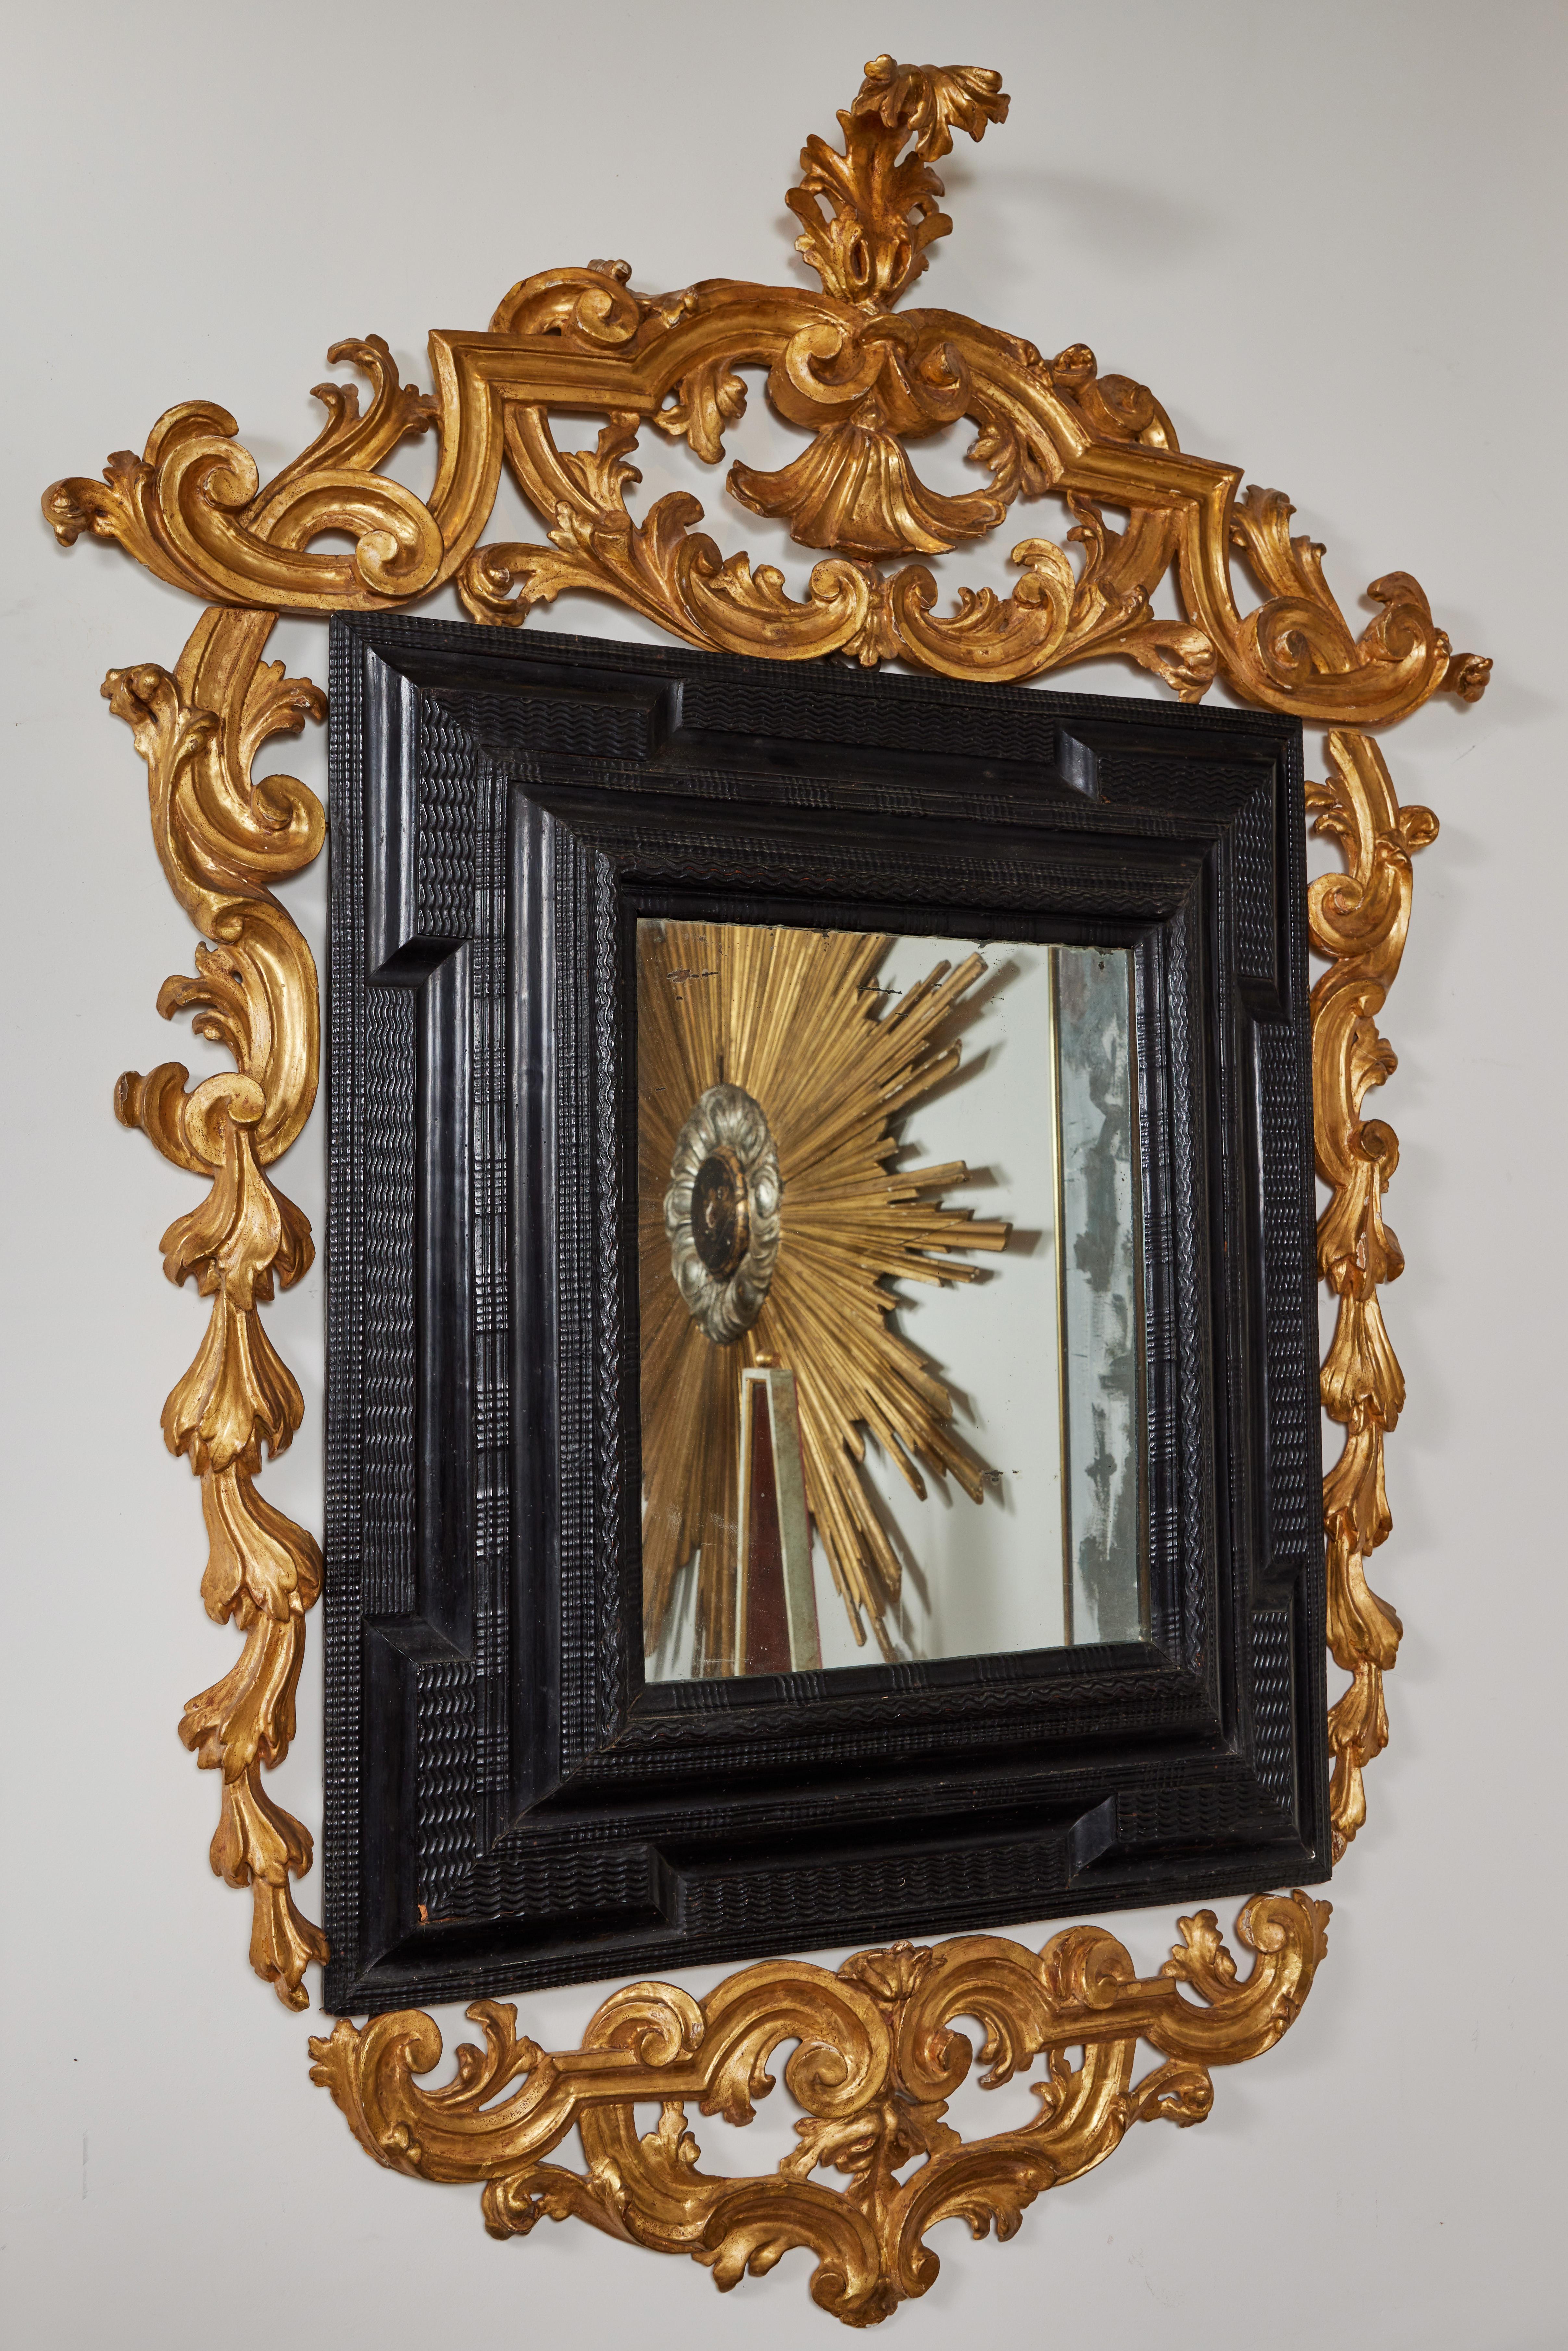 Striking, hand-carved, ebonized, Dutch style mirror embellished with relief wave forms throughout. The whole surrounded by a period, giltwood, pierced surround of magnificent scrollwork and finished with an impressive crown featuring a large, curled